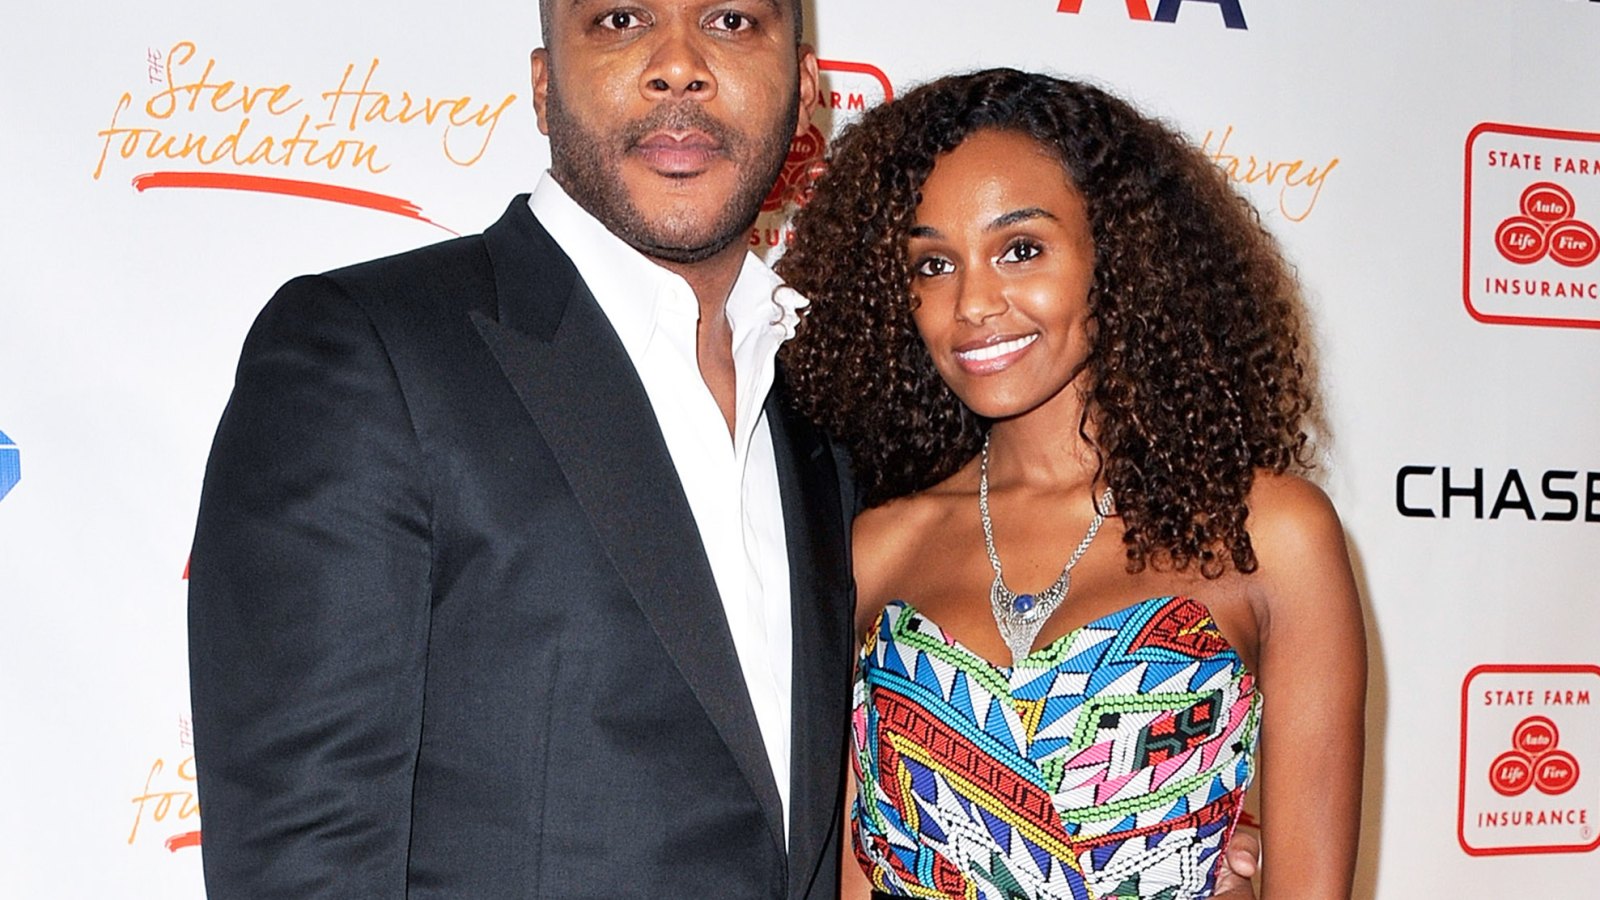 Tyler Perry, Girlfriend Gelila Bekele Expecting First Child Together!